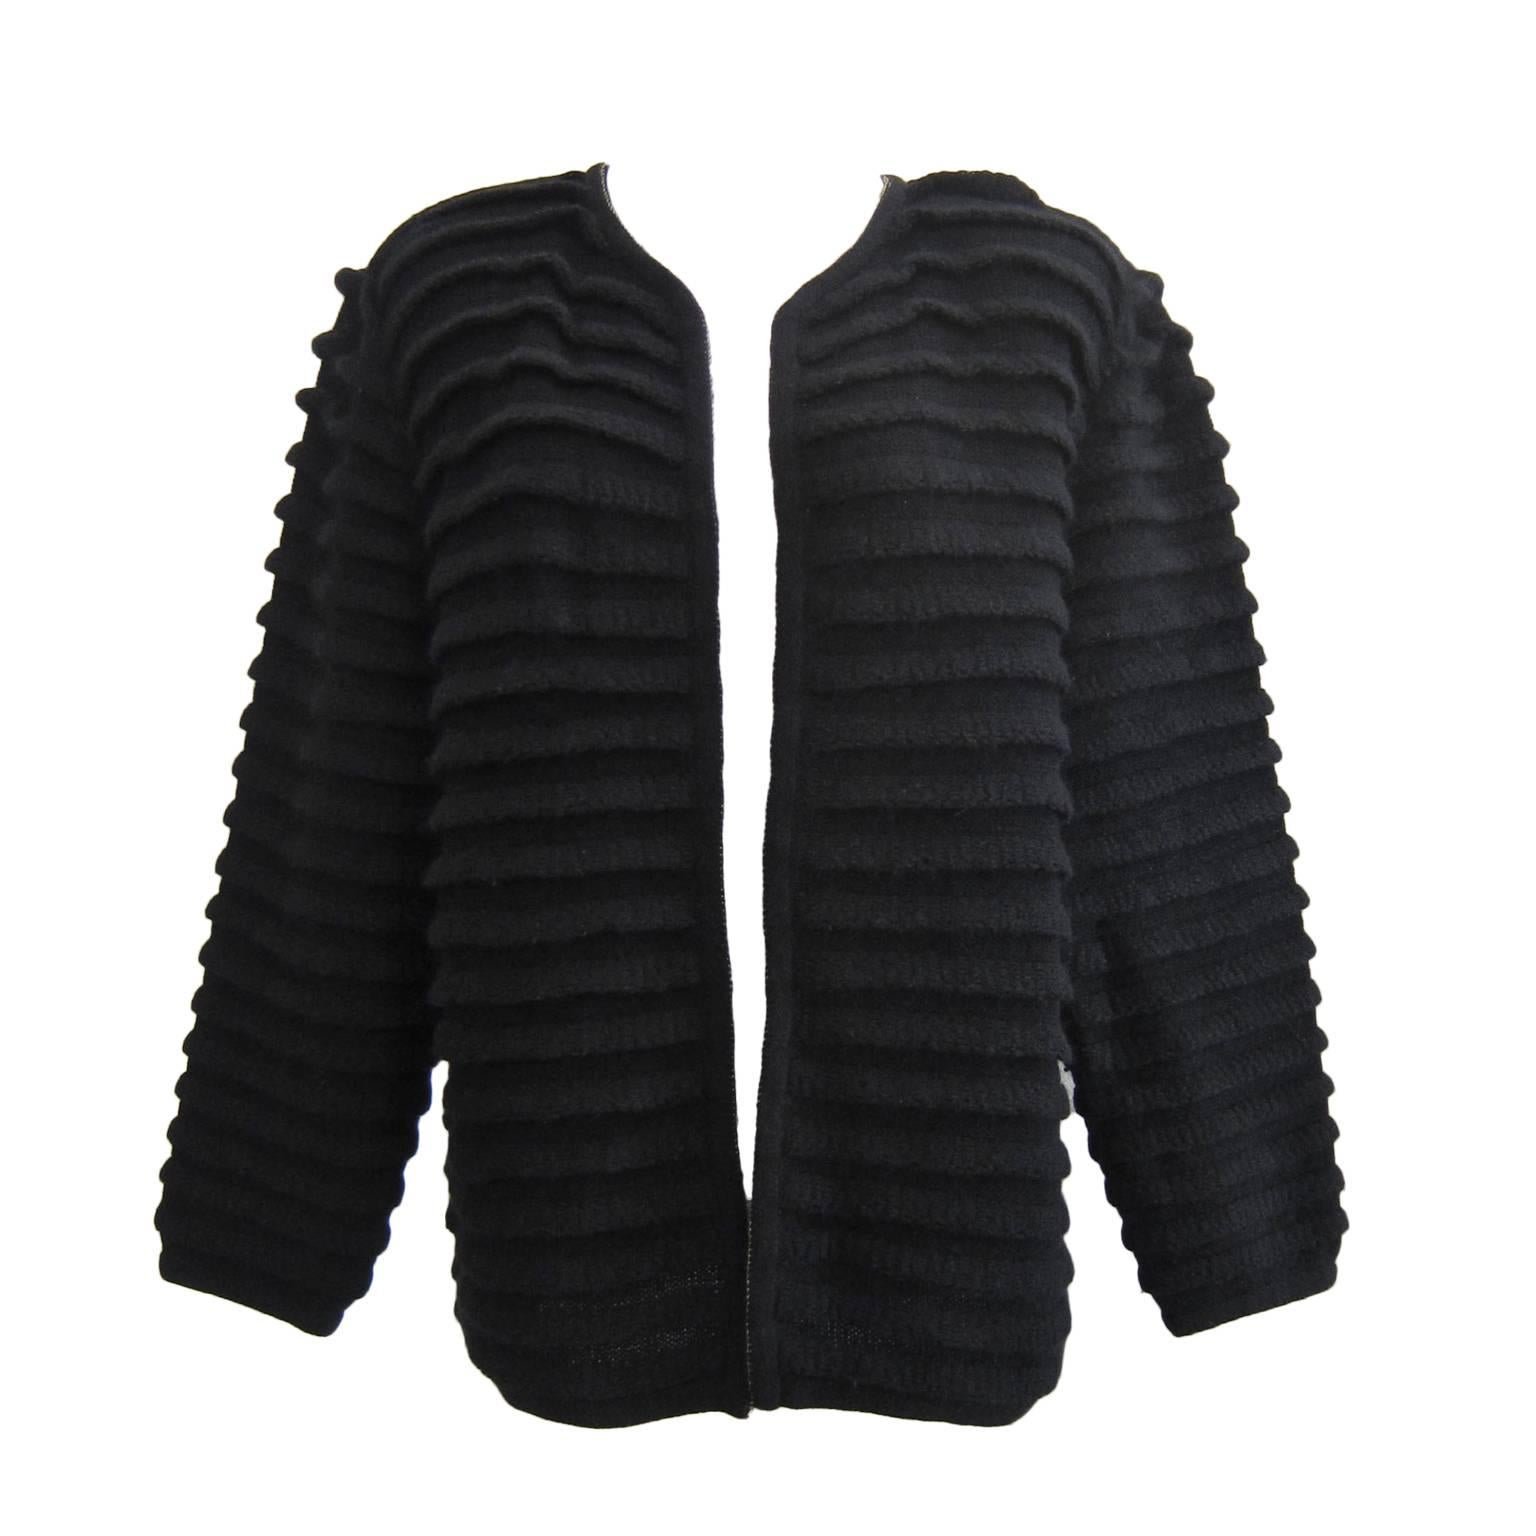 Early Issey Miyake black folded pleats knit open cardigan / jacket from 1980s. 
Each folded pleats on surface create amazing form in contrast with shadows and movement.
It fits like size Medium.
Measurements : 
Under arm 52 cm
Length 61 cm
Shoulder